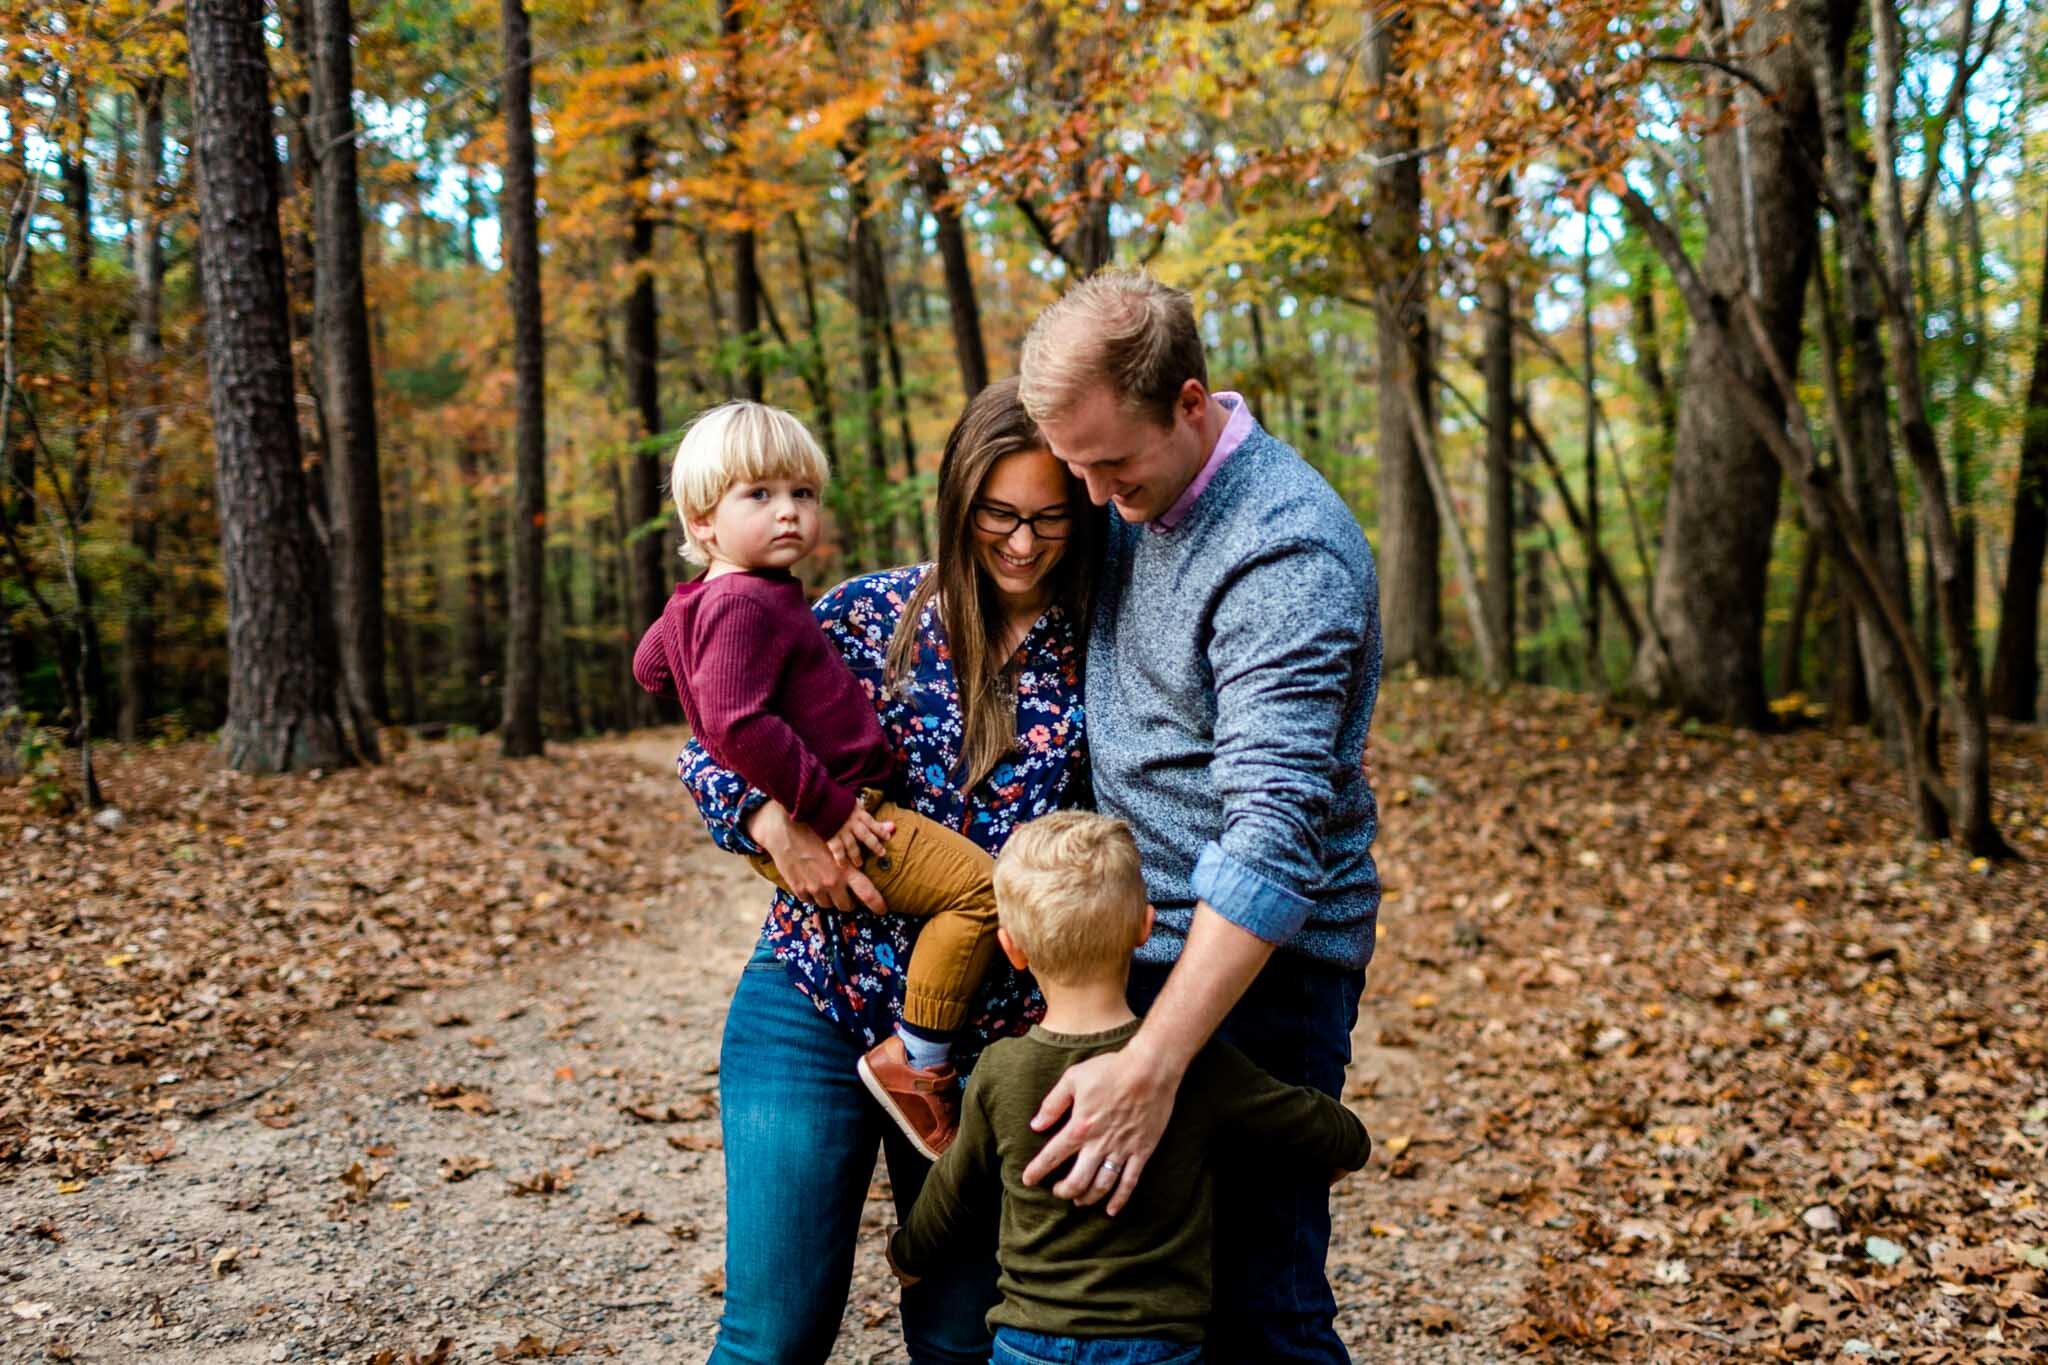 Raleigh Family Photographer at Umstead Park | By G. Lin Photography | Family of four standing together among trees